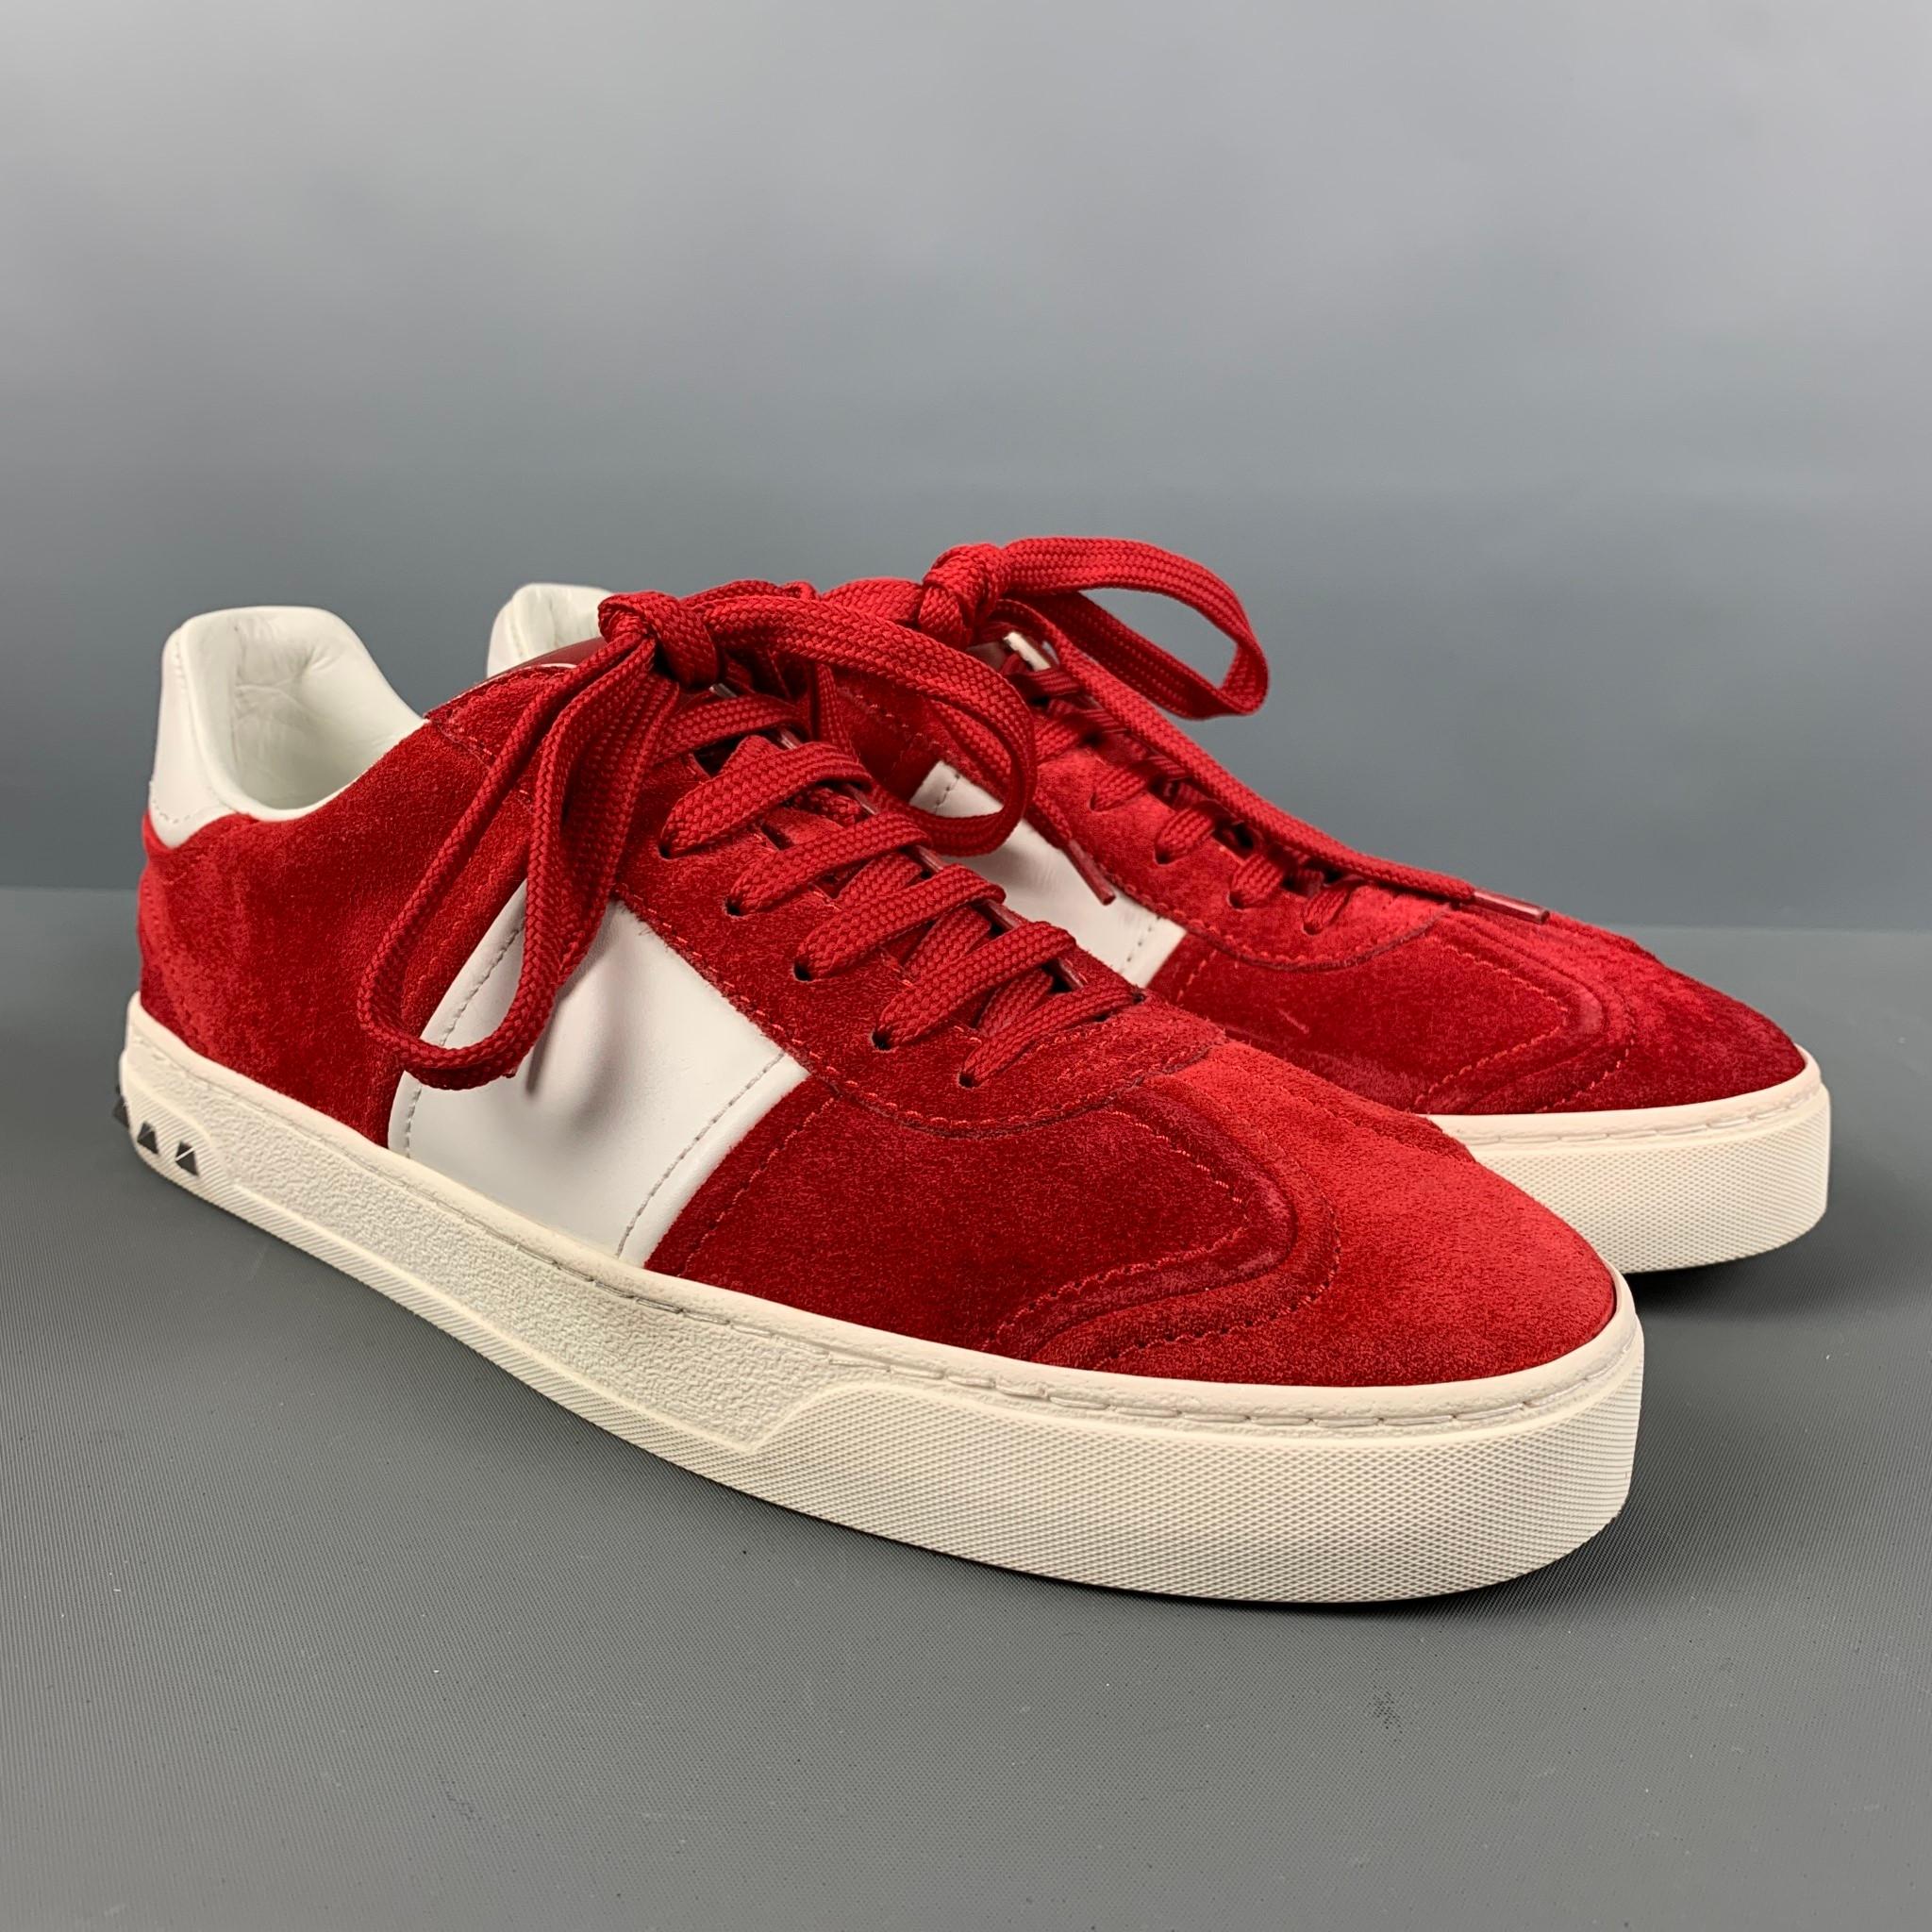 VALENTINO 'City Planet Rockstud' sneakers comes in a red and white suede featuring a low-top style, silver studs, and a lace up closure. Made in Italy.

Very Good Pre-Owned Condition.
Marked: TNA08Y2 41

Measurements: 

Length: 11.5 in.
Width: 4 in.